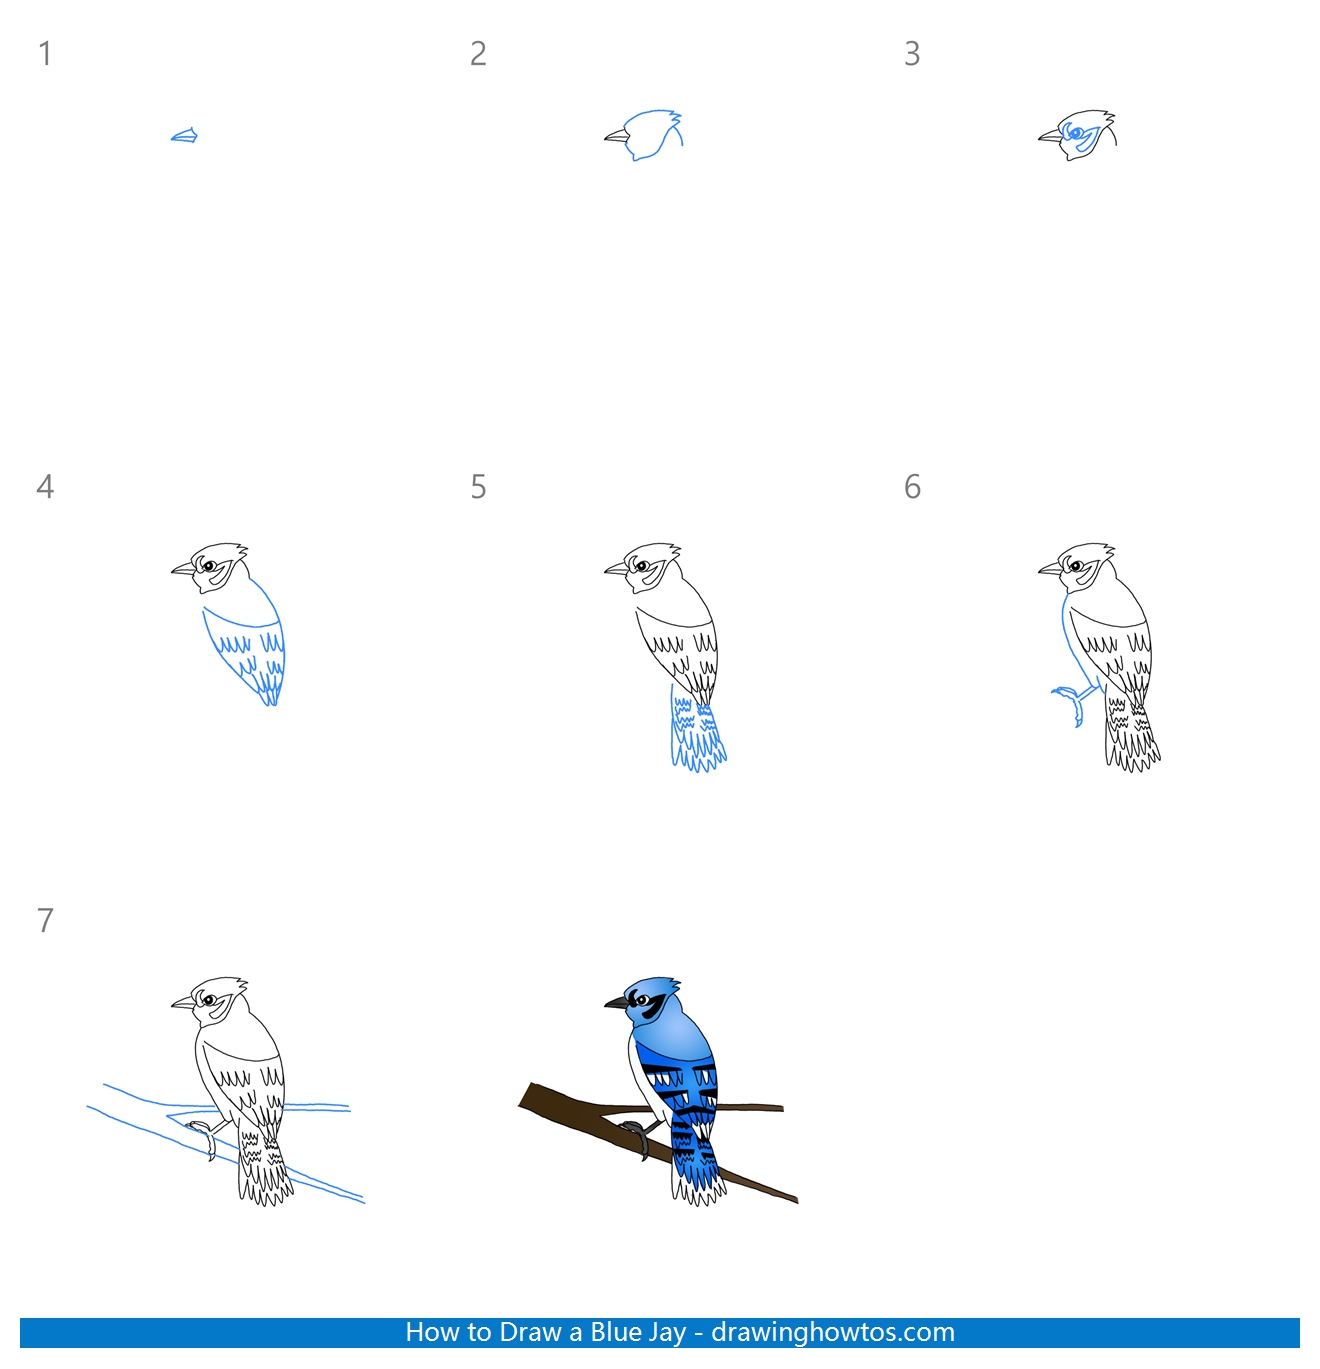 How to Draw a Blue Jay Step by Step